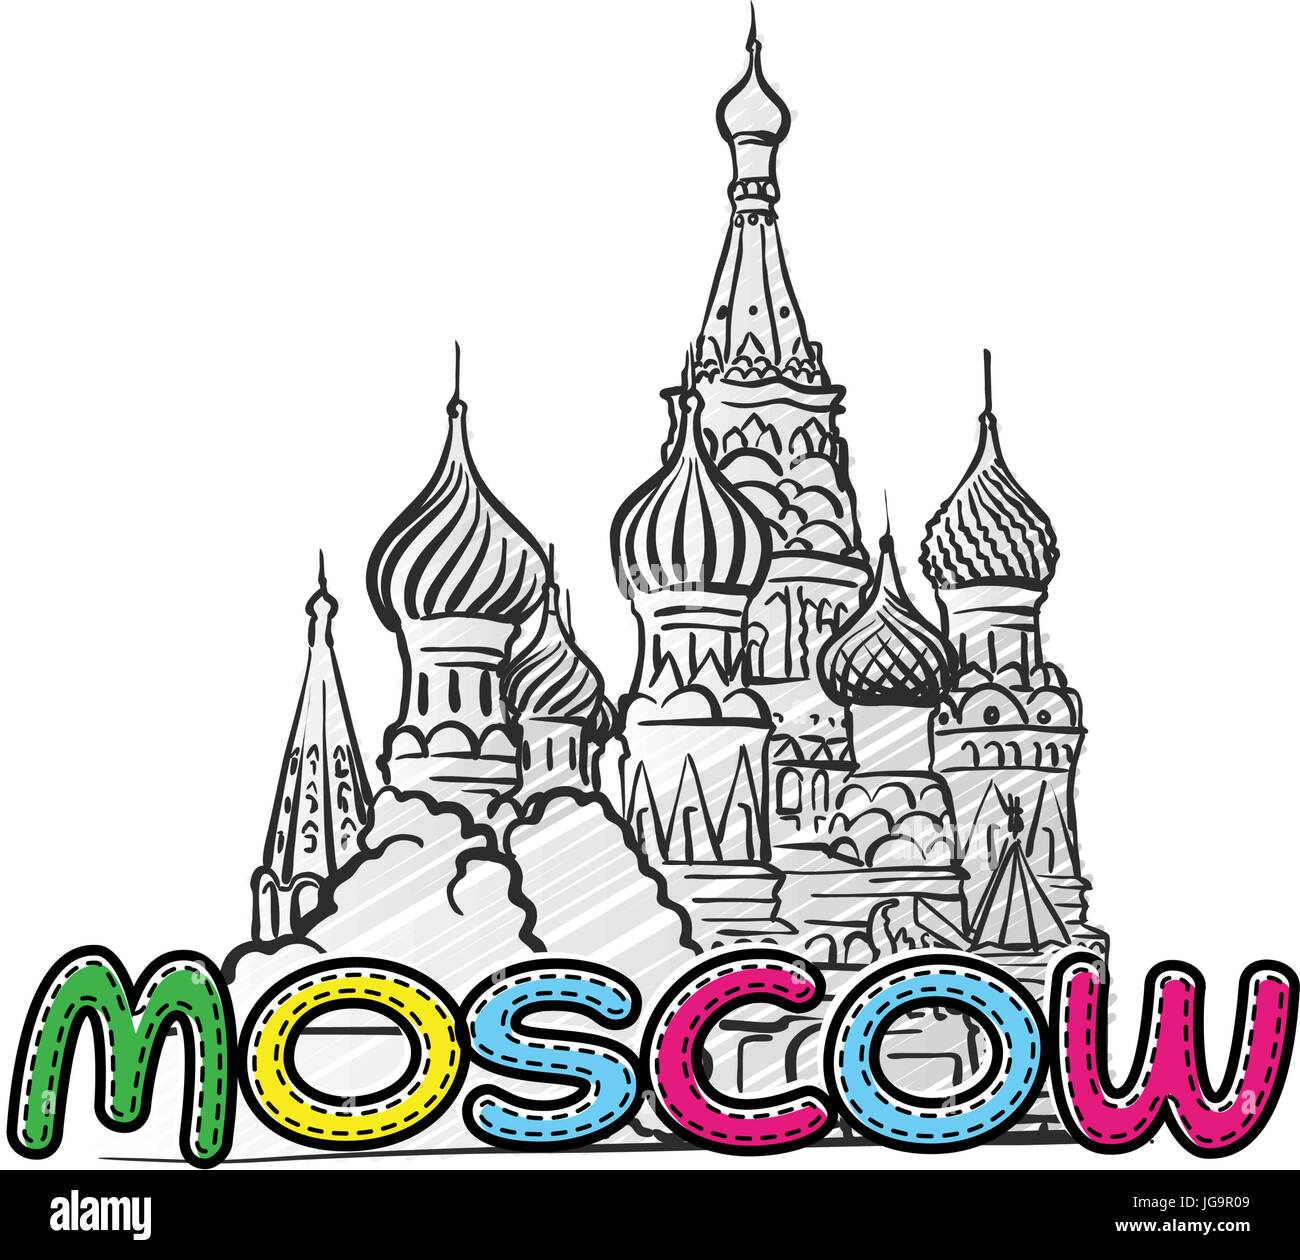 Moscow beautiful sketched icon, famaous hand-drawn landmark, city name lettering, vector illustration Stock Vector